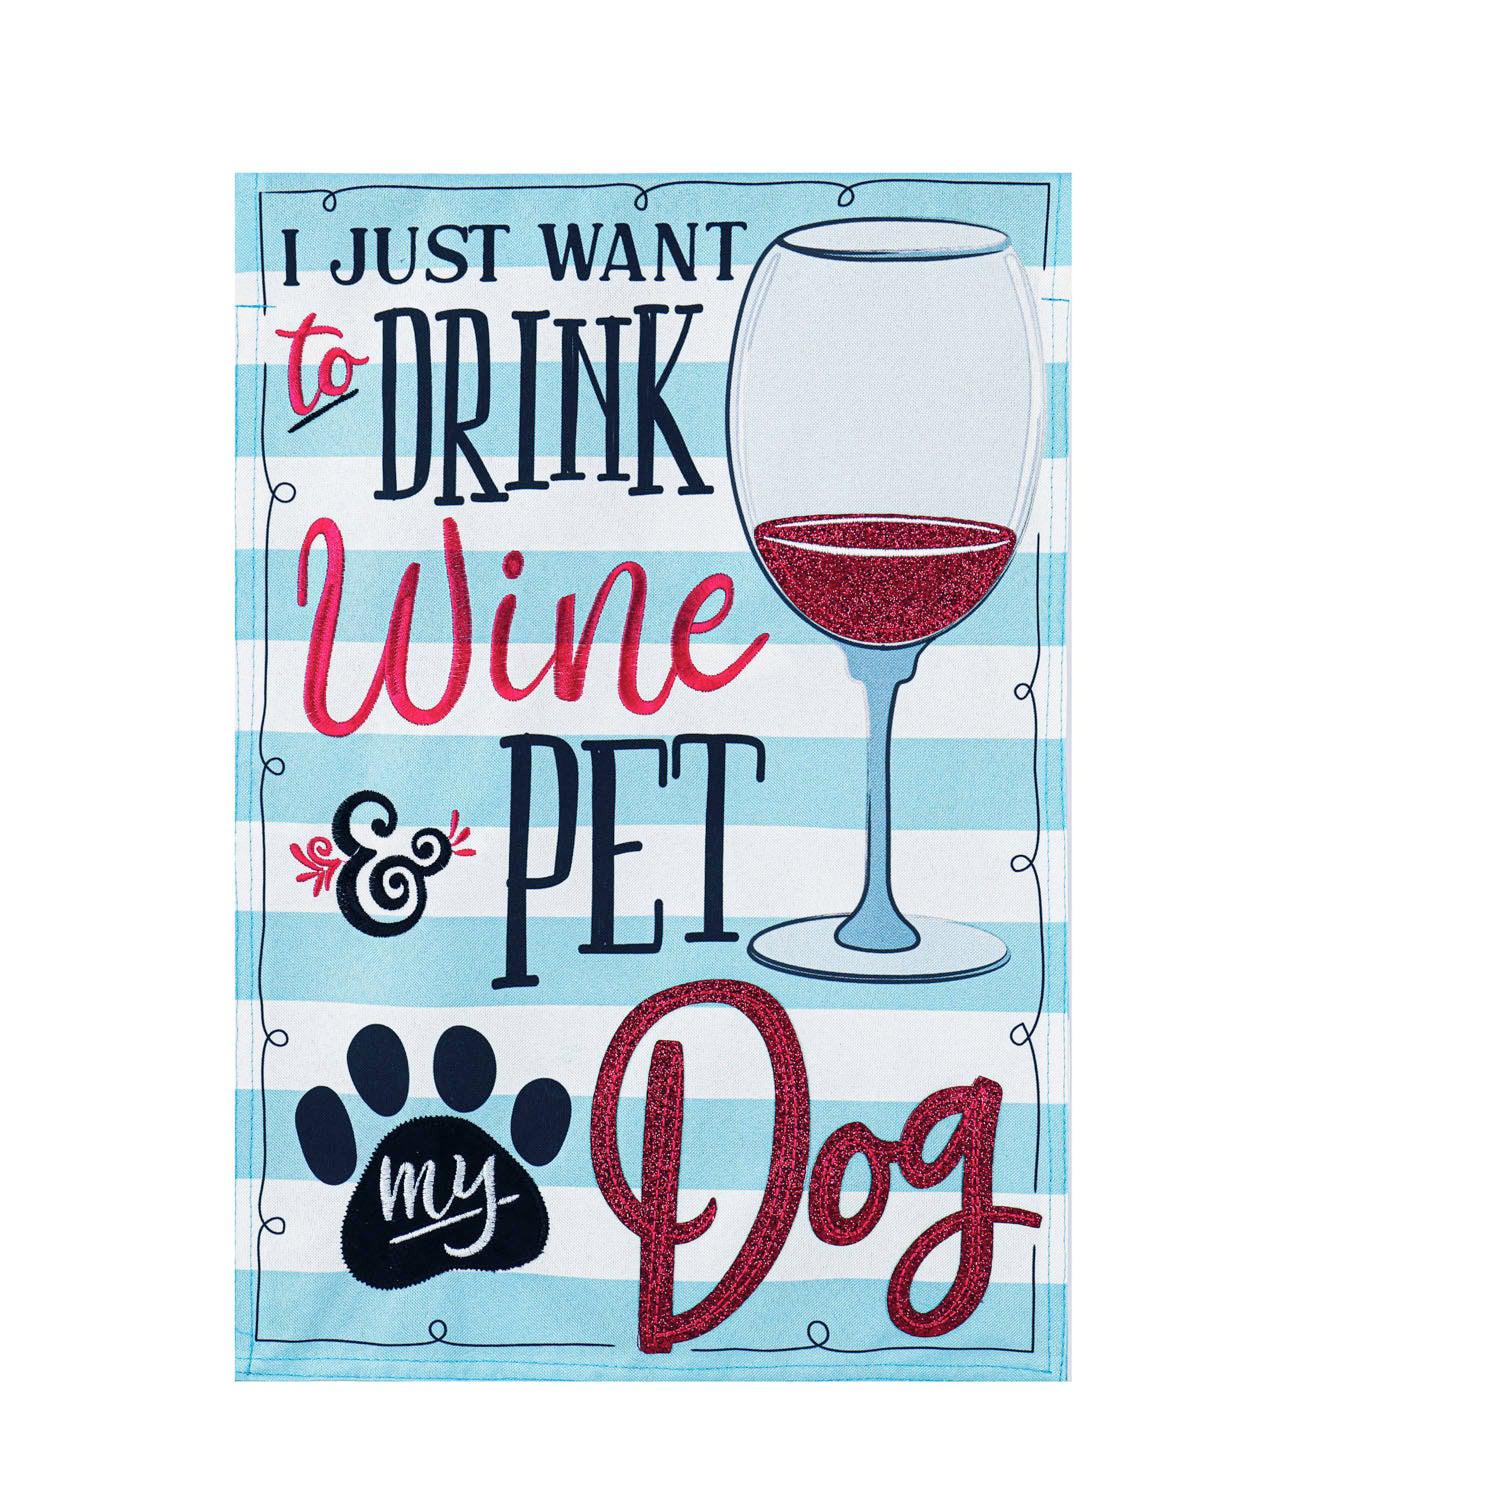 The Wine and Pet My Dog garden flag features a glass of wine, a paw print, and the words "I Just Want to Drink Wine and Pet My Dog". 